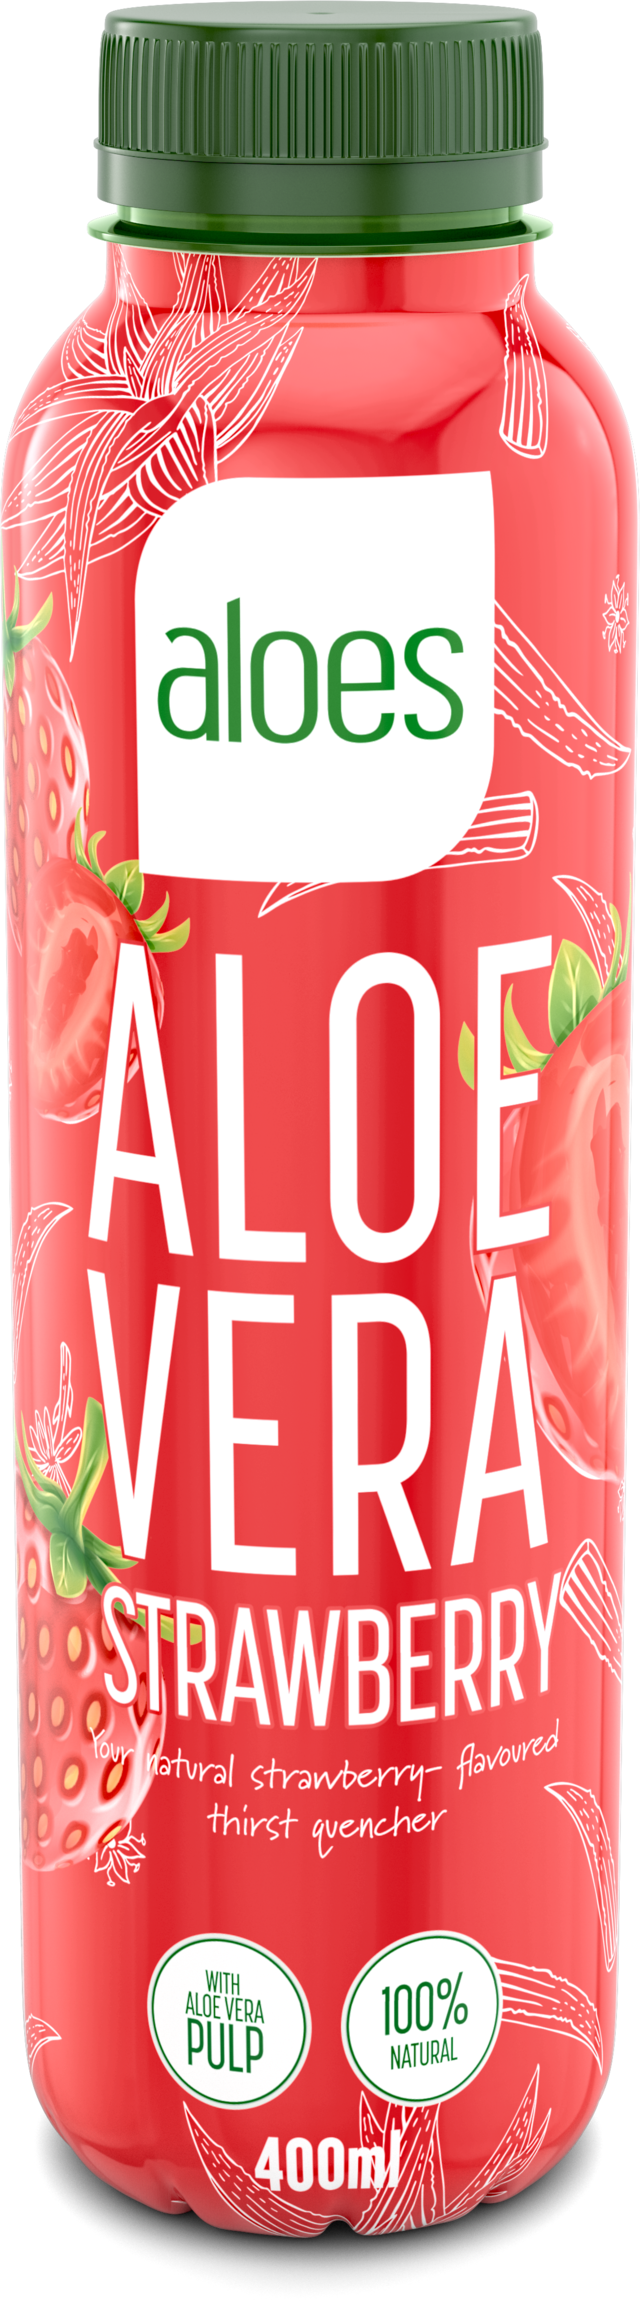 3418_Aloes_AloeVera_Strawberry_400ml_Cpack_shadow.2.png